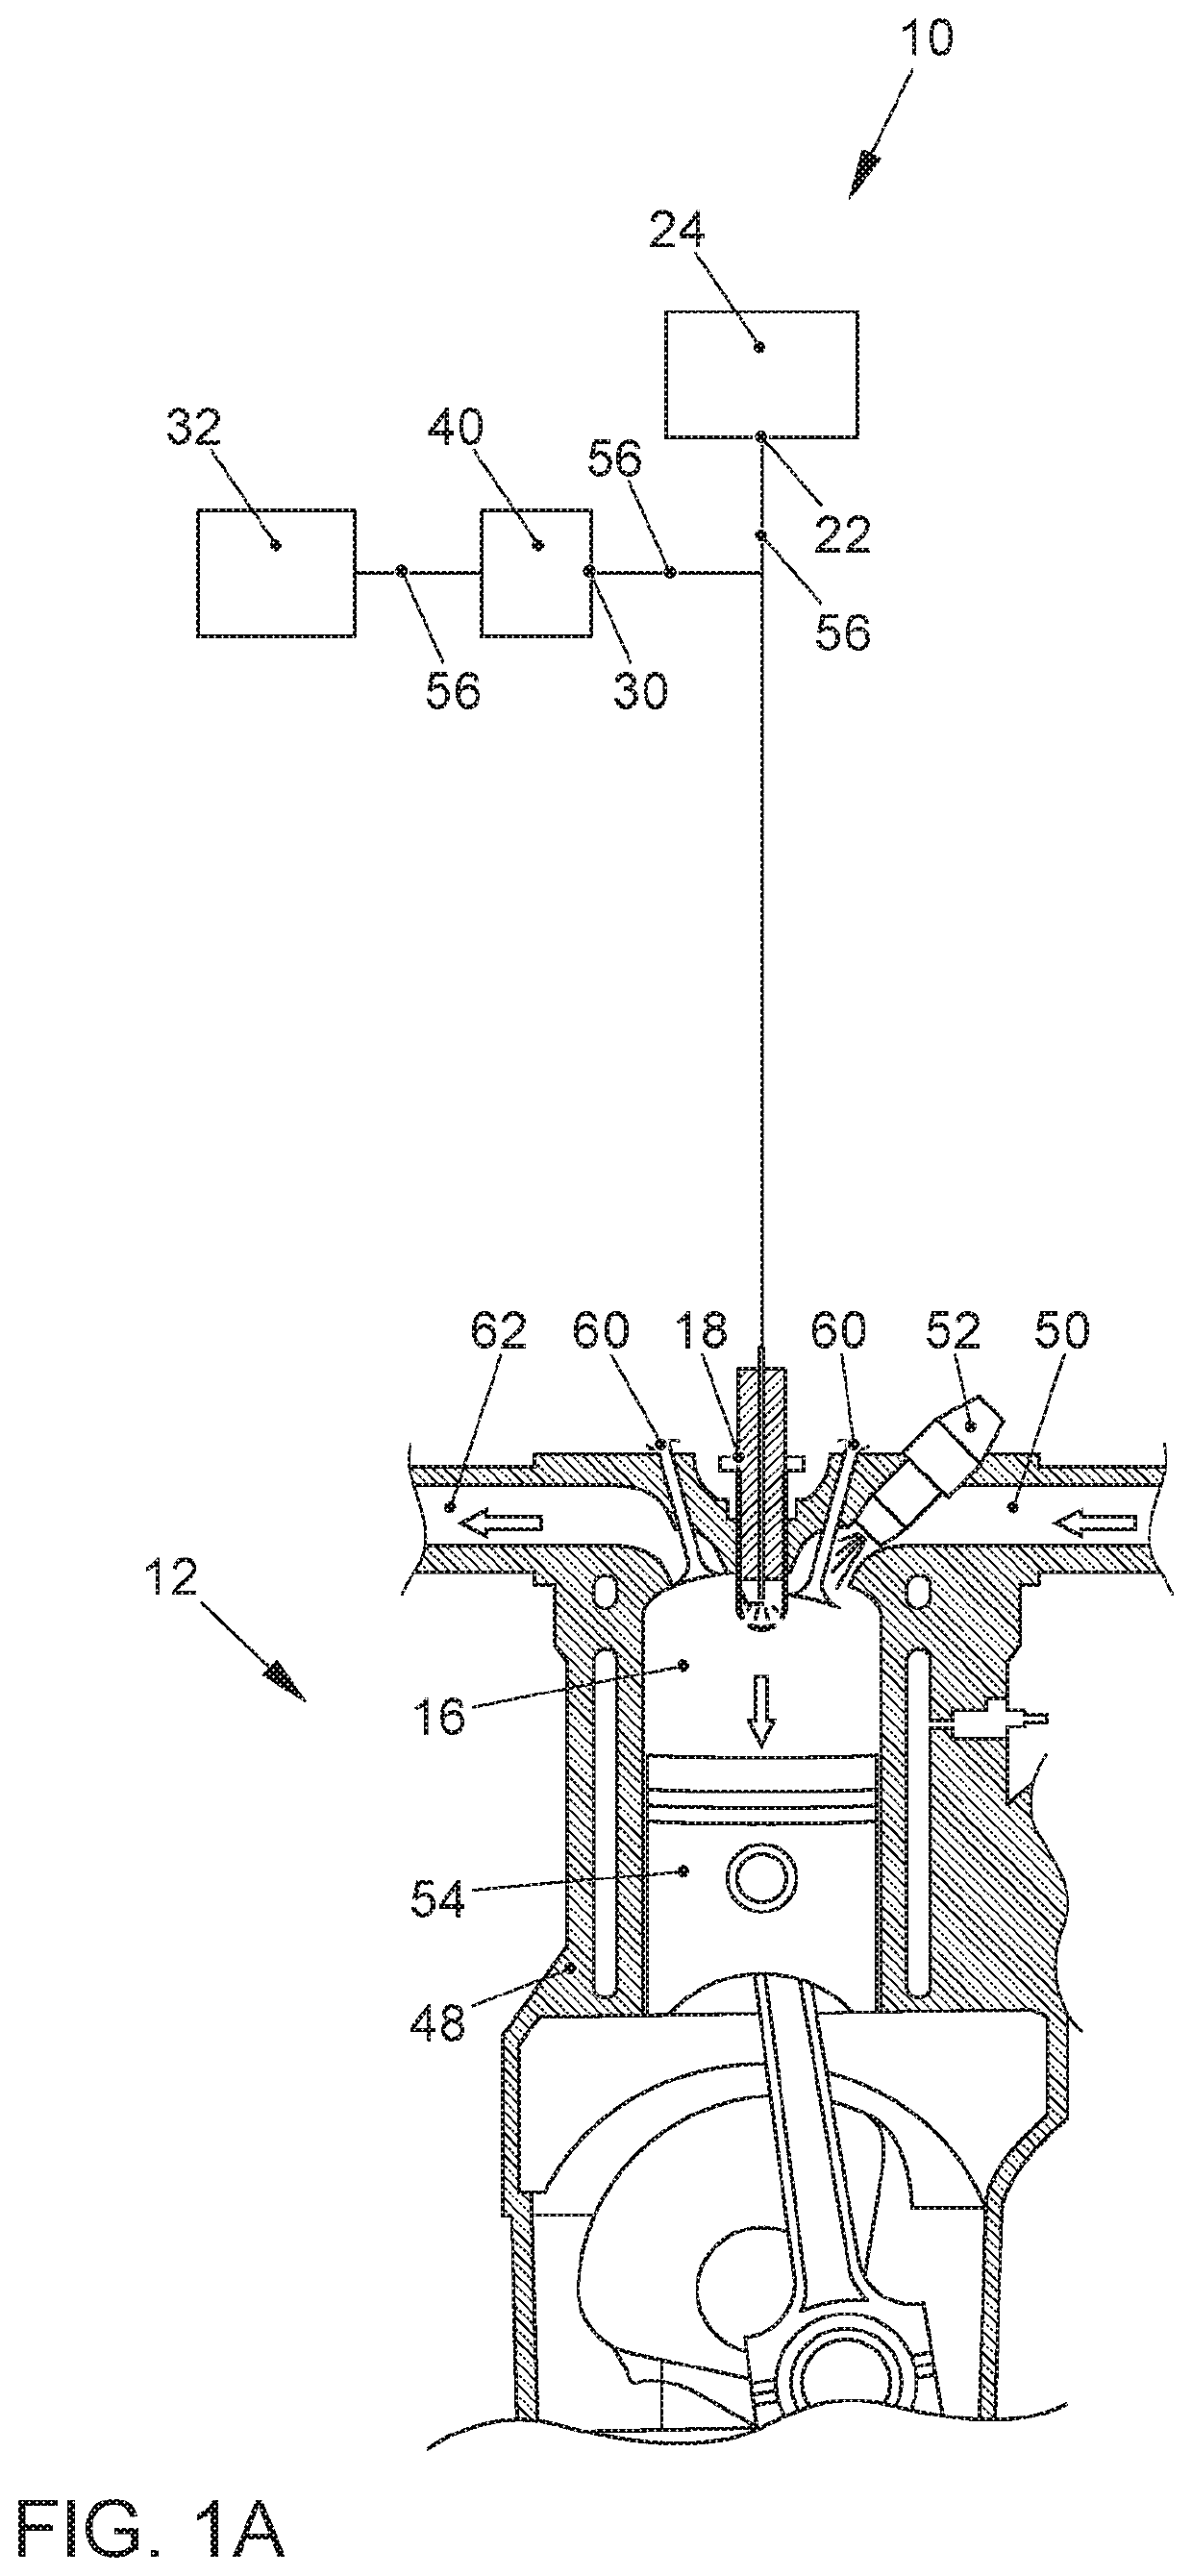 Ignition system having a high-frequency plasma-enhanced ignition spark of a spark plug, including an antechamber, and a method associated therewith